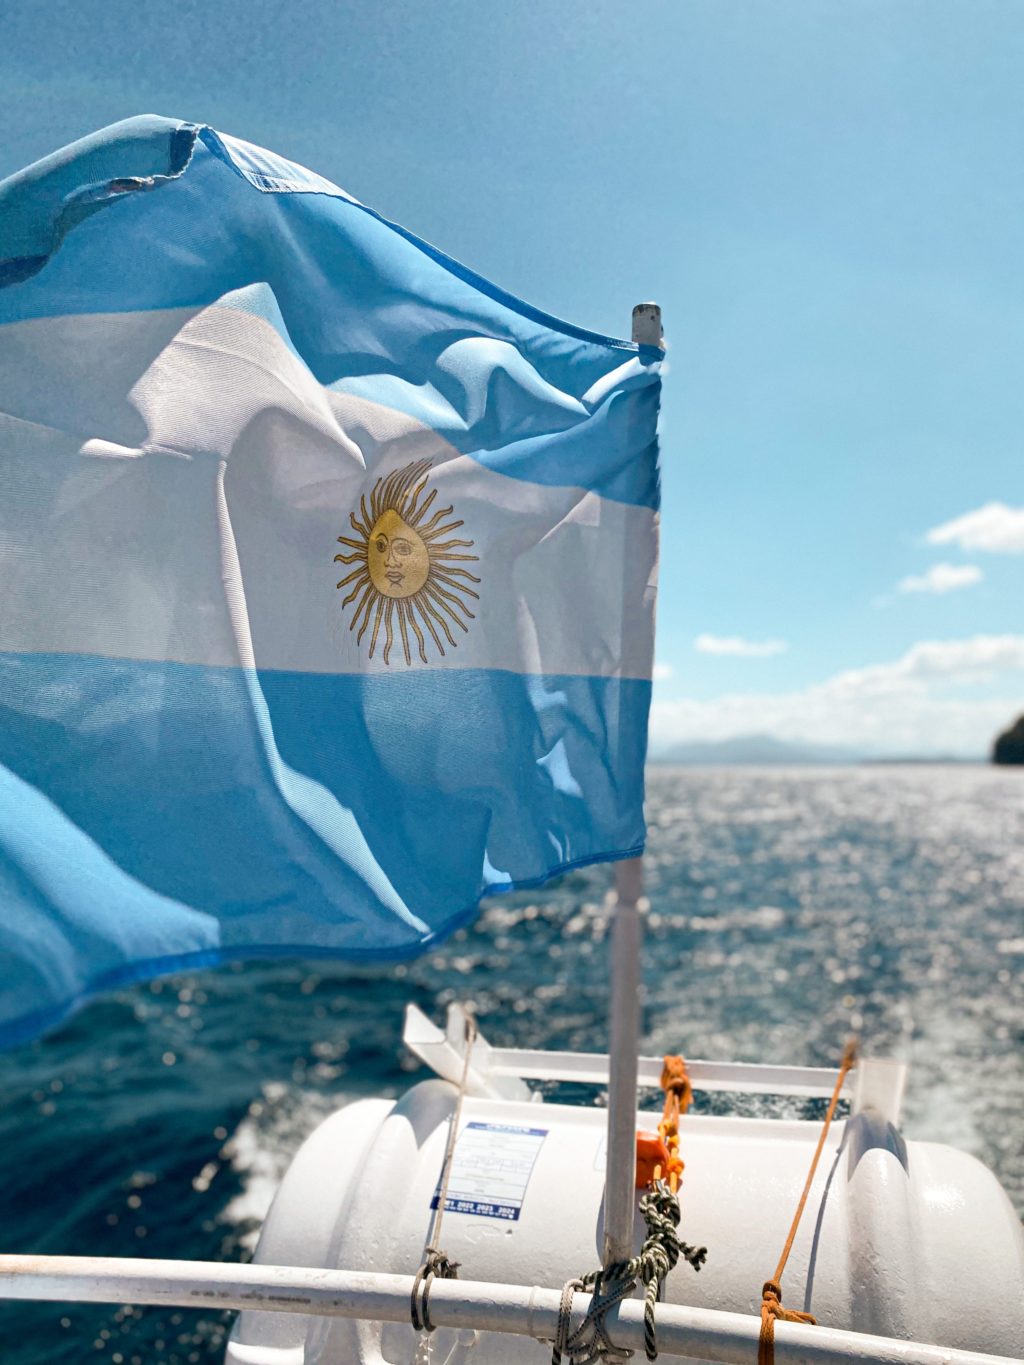 Argentinian Government to present project for medical cannabis industry